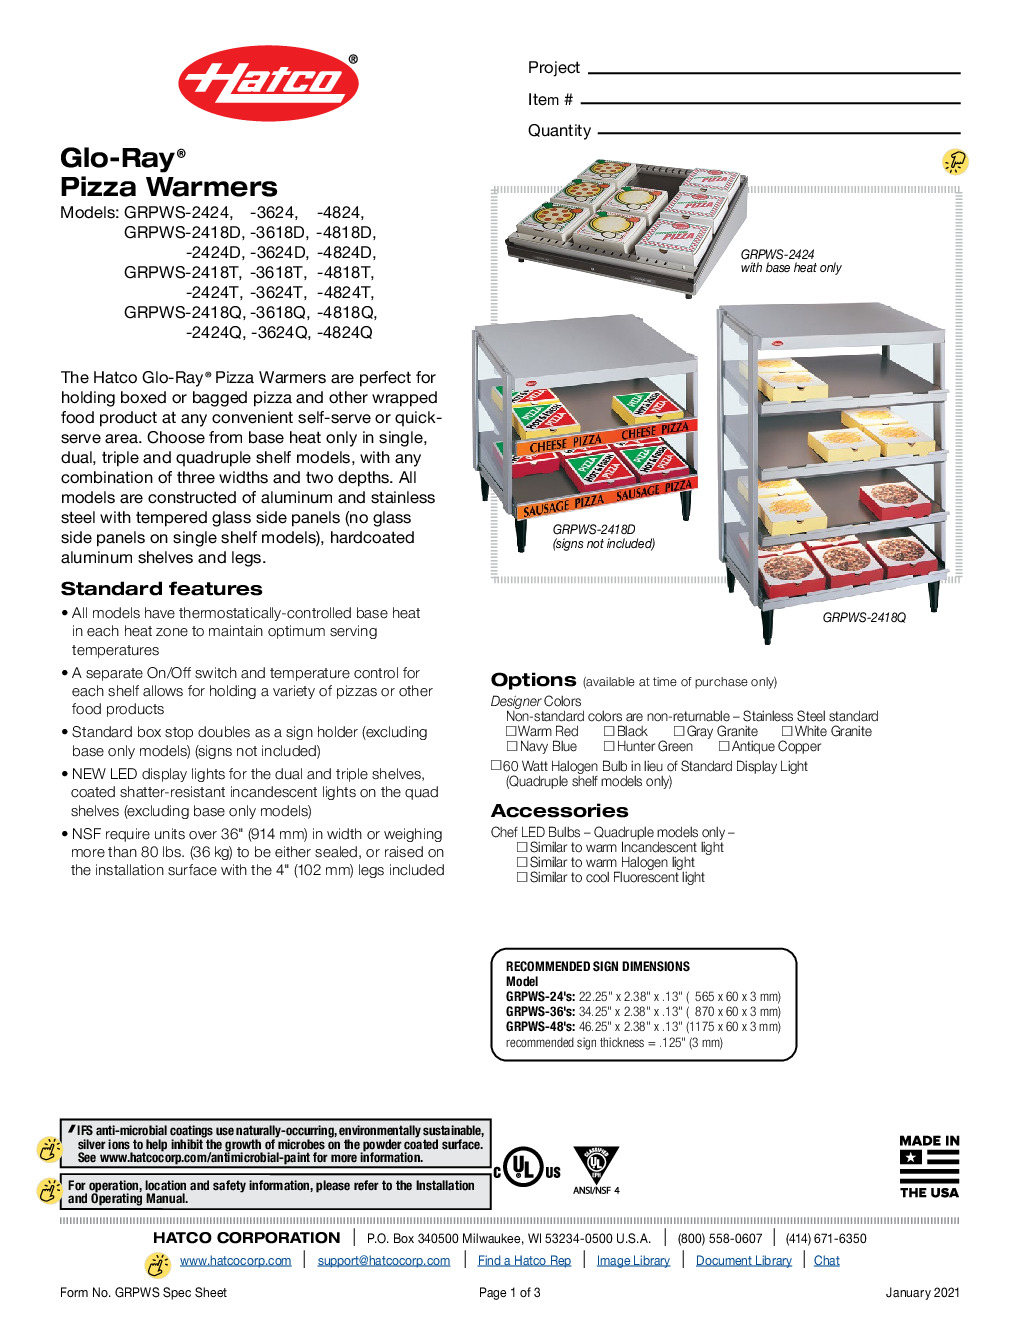 Hatco GRPWS-2418D For Multi-Product Heated Display Merchandiser